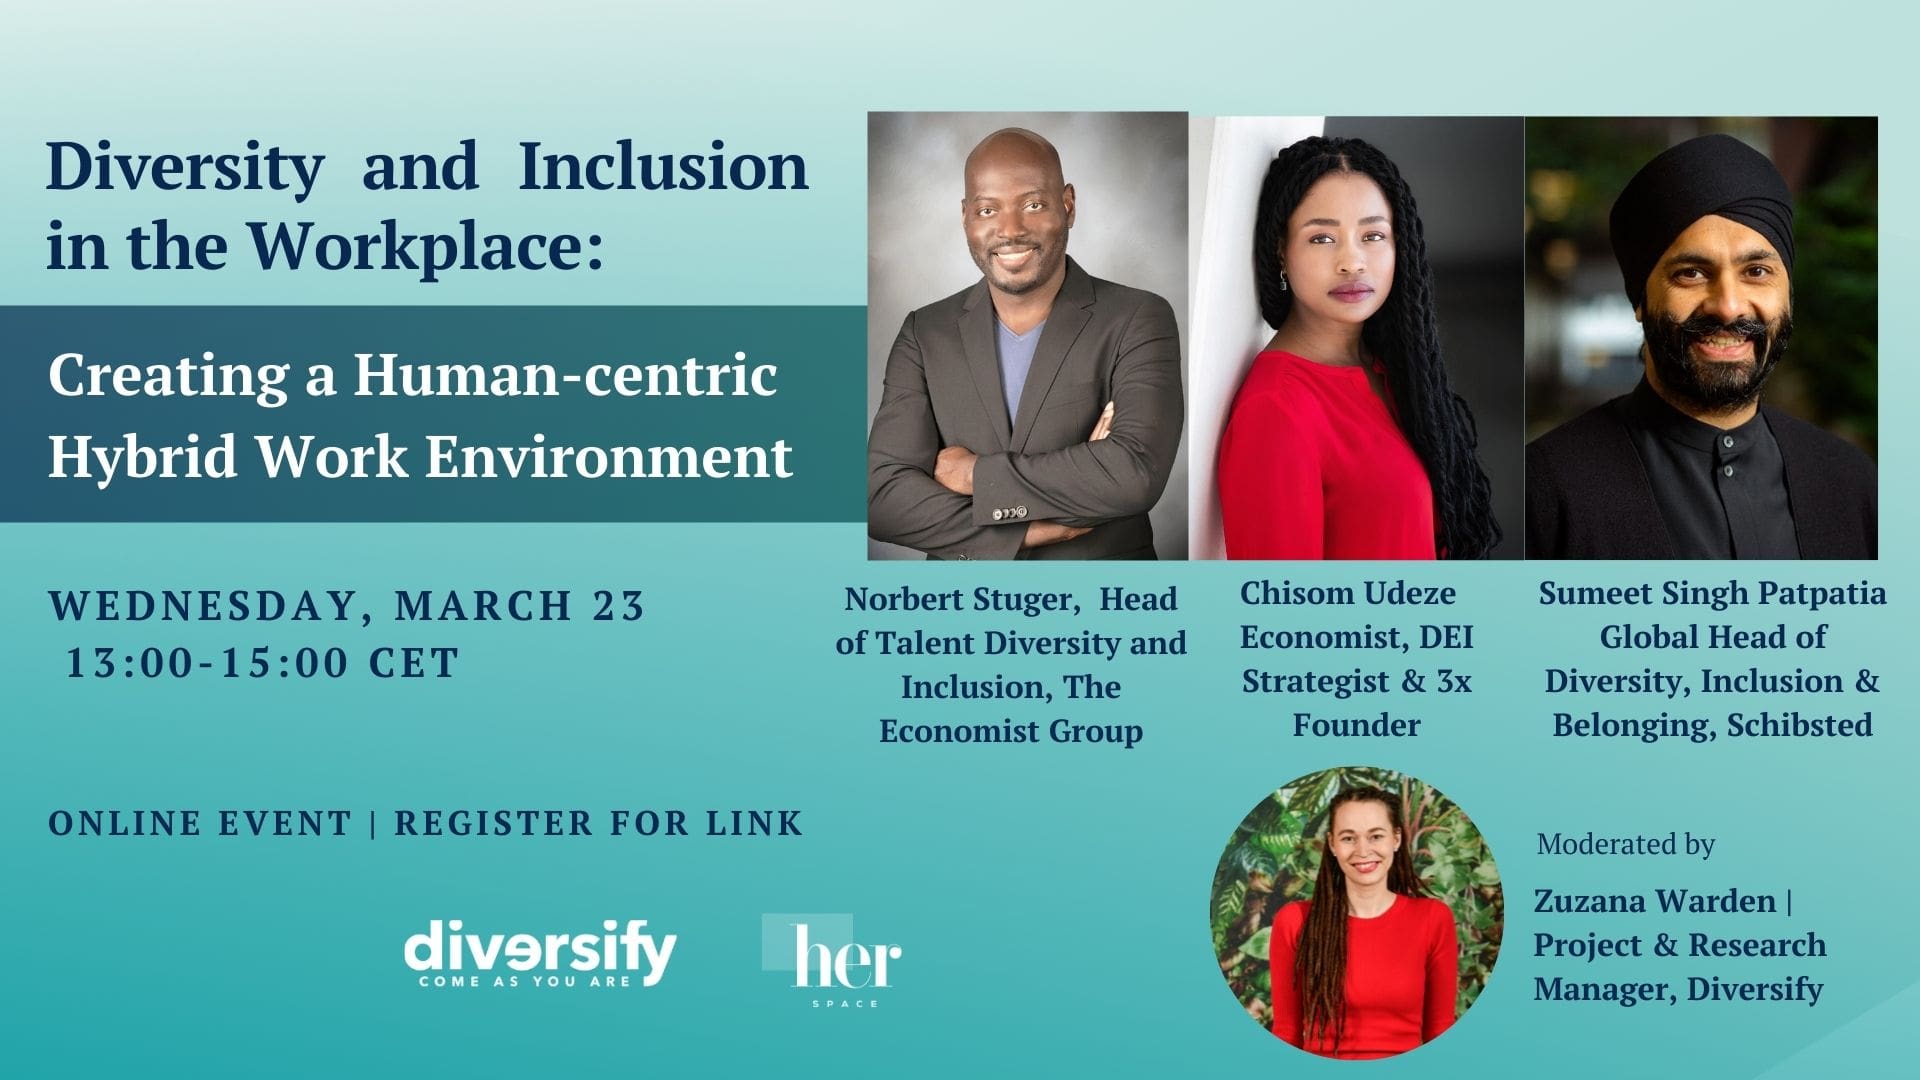 Diversity and Inclusion in the Workplace: Creating a Human Centric Hybrid Work Environment